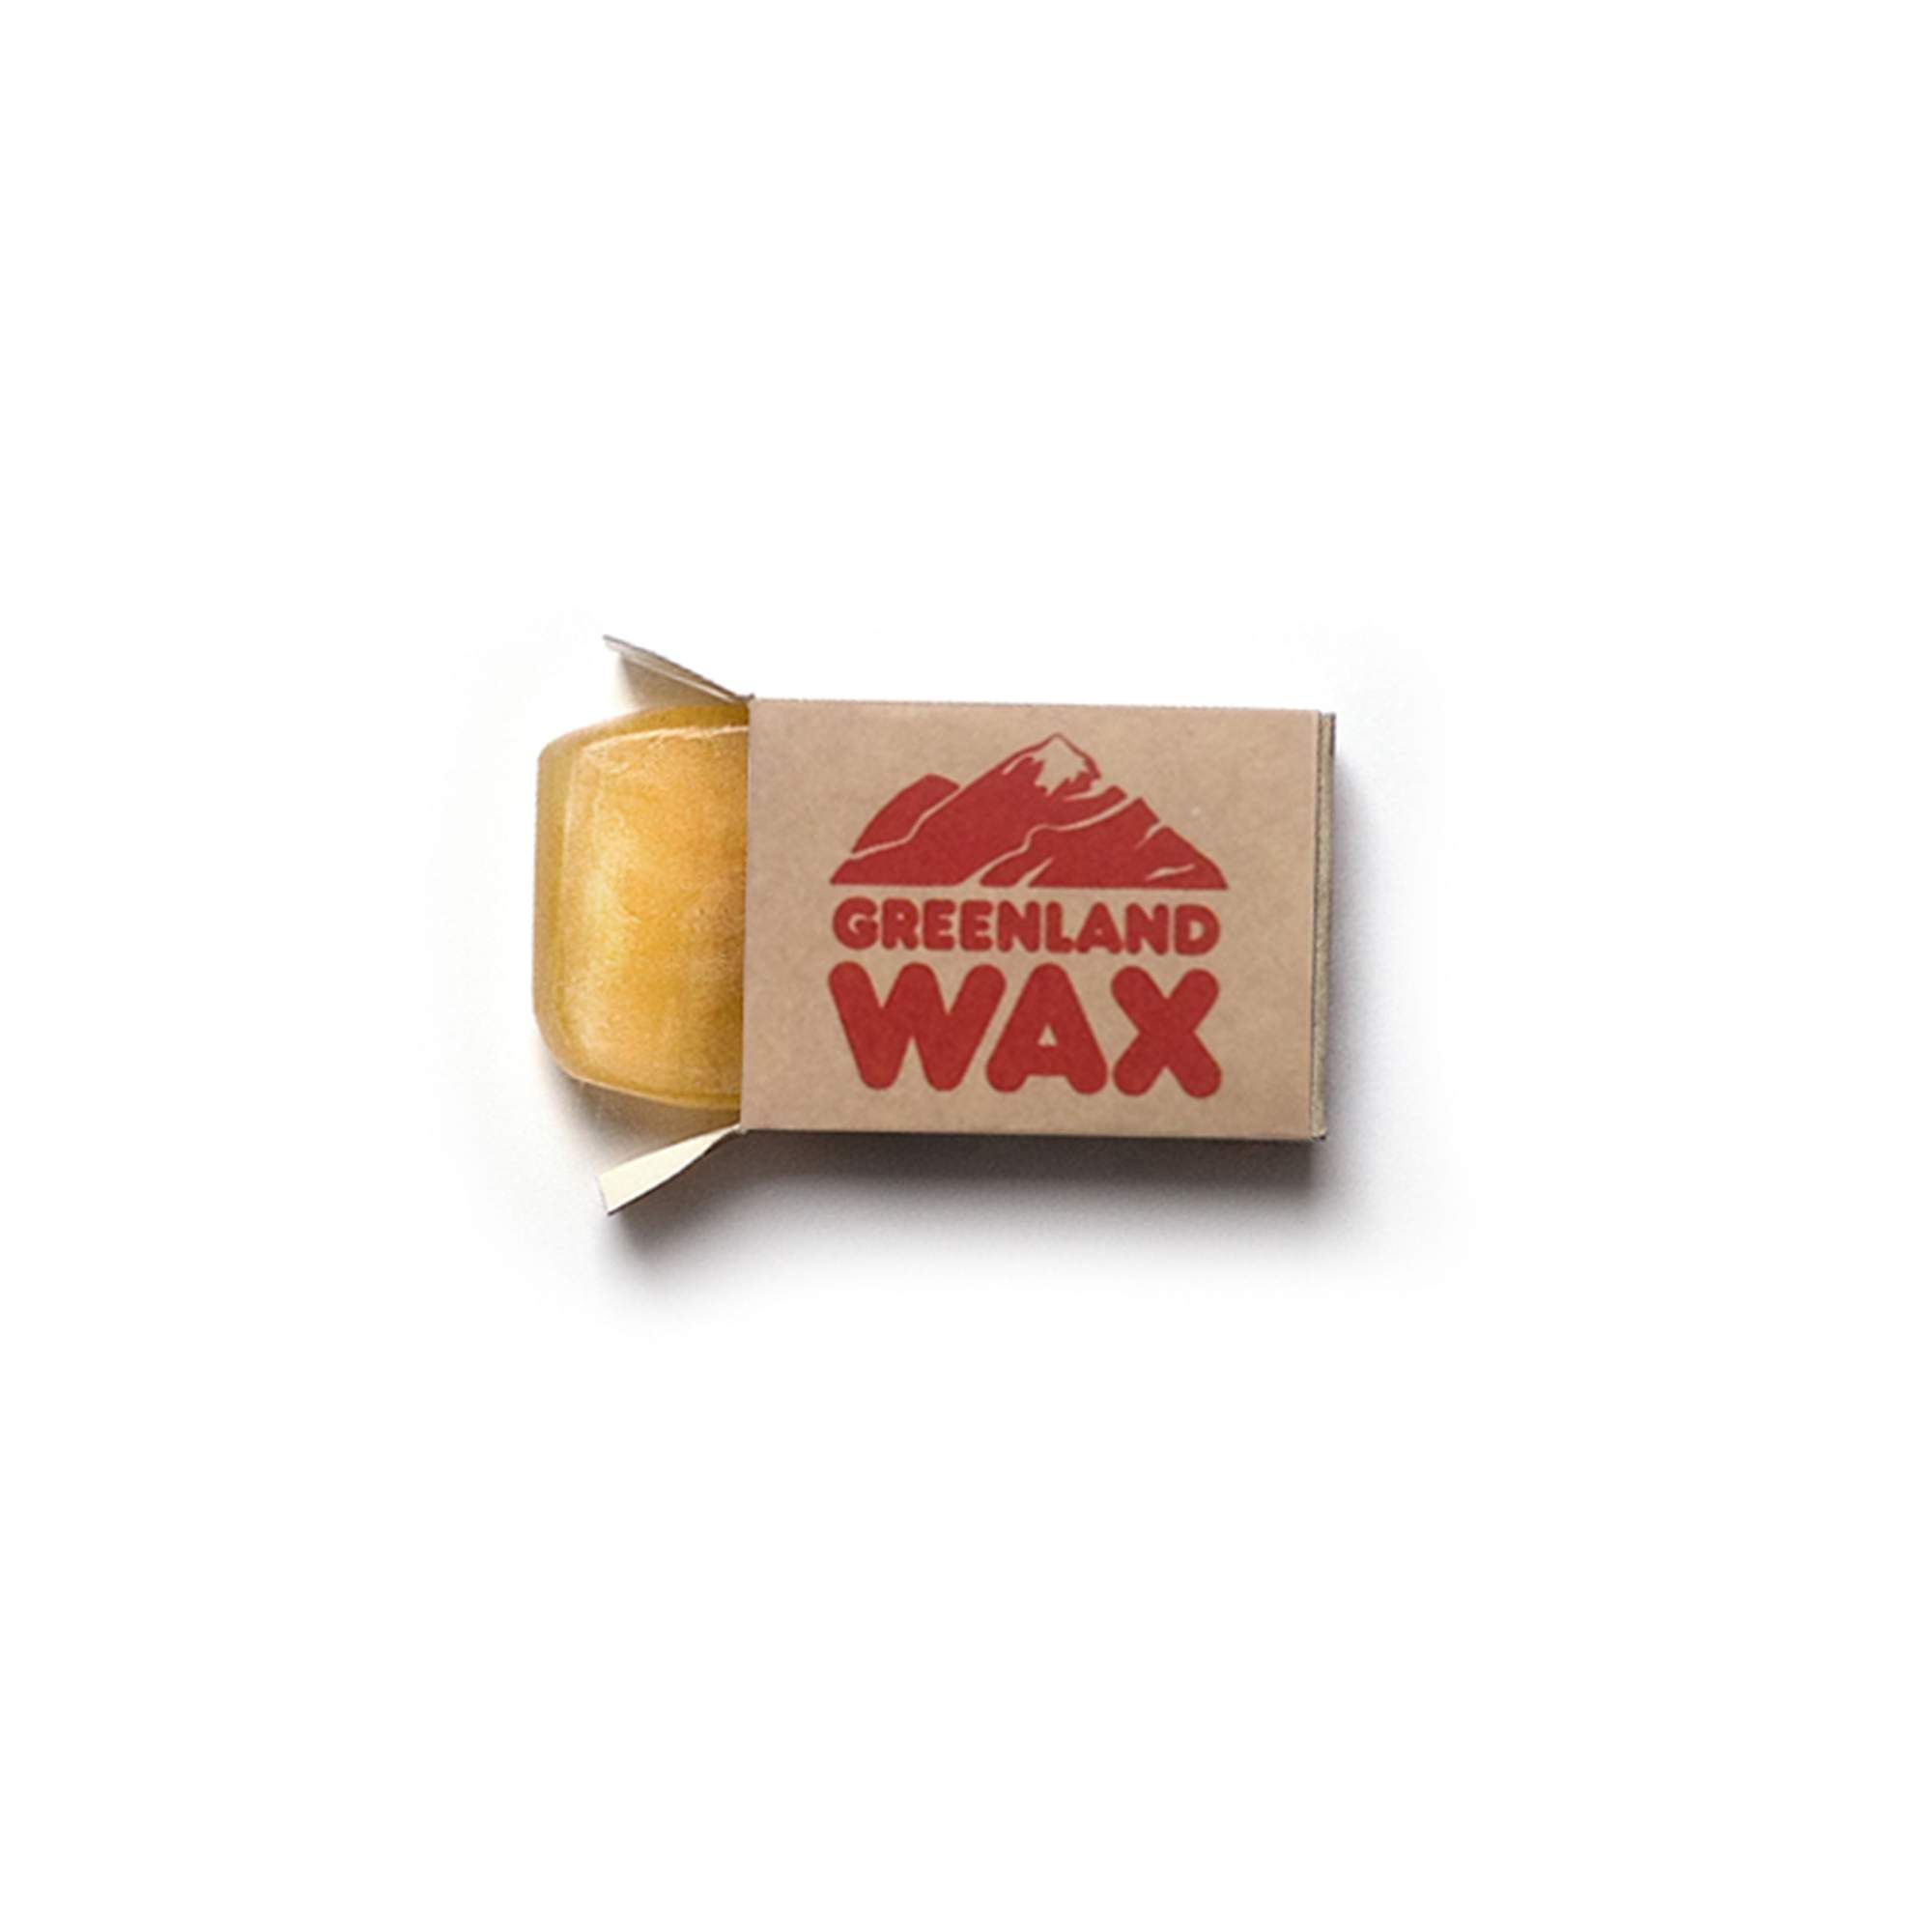 Cire Greenland Wax Travel Pack